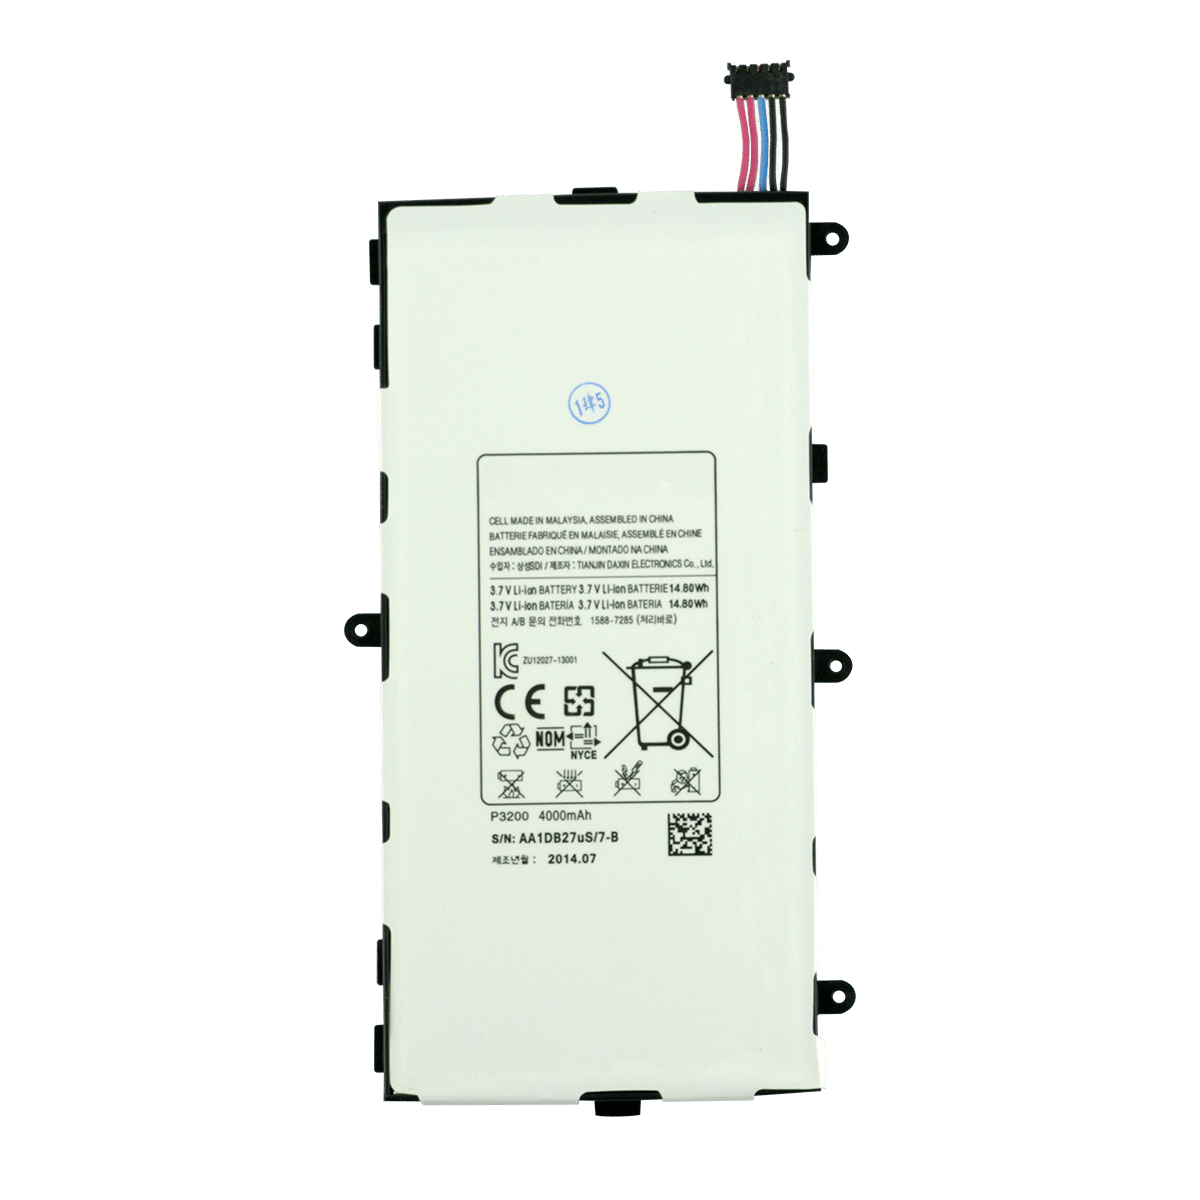 Samsung Galaxy Tab 3 7.0 Battery Replacement